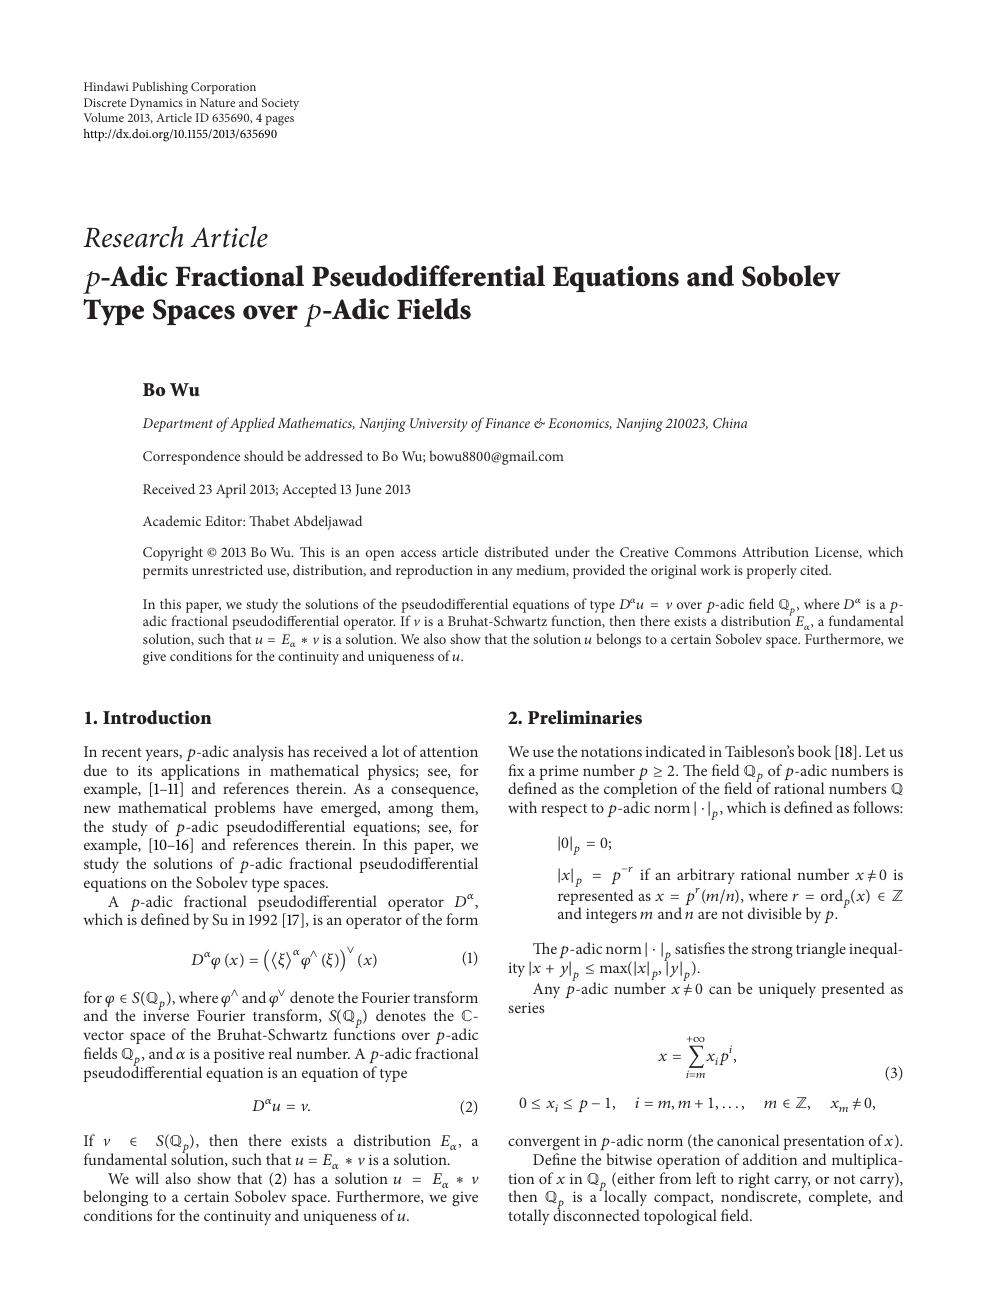 Adic Fractional Pseudodifferential Equations And Sobolev Type Spaces Over Adic Fields Topic Of Research Paper In Mathematics Download Scholarly Article Pdf And Read For Free On Cyberleninka Open Science Hub